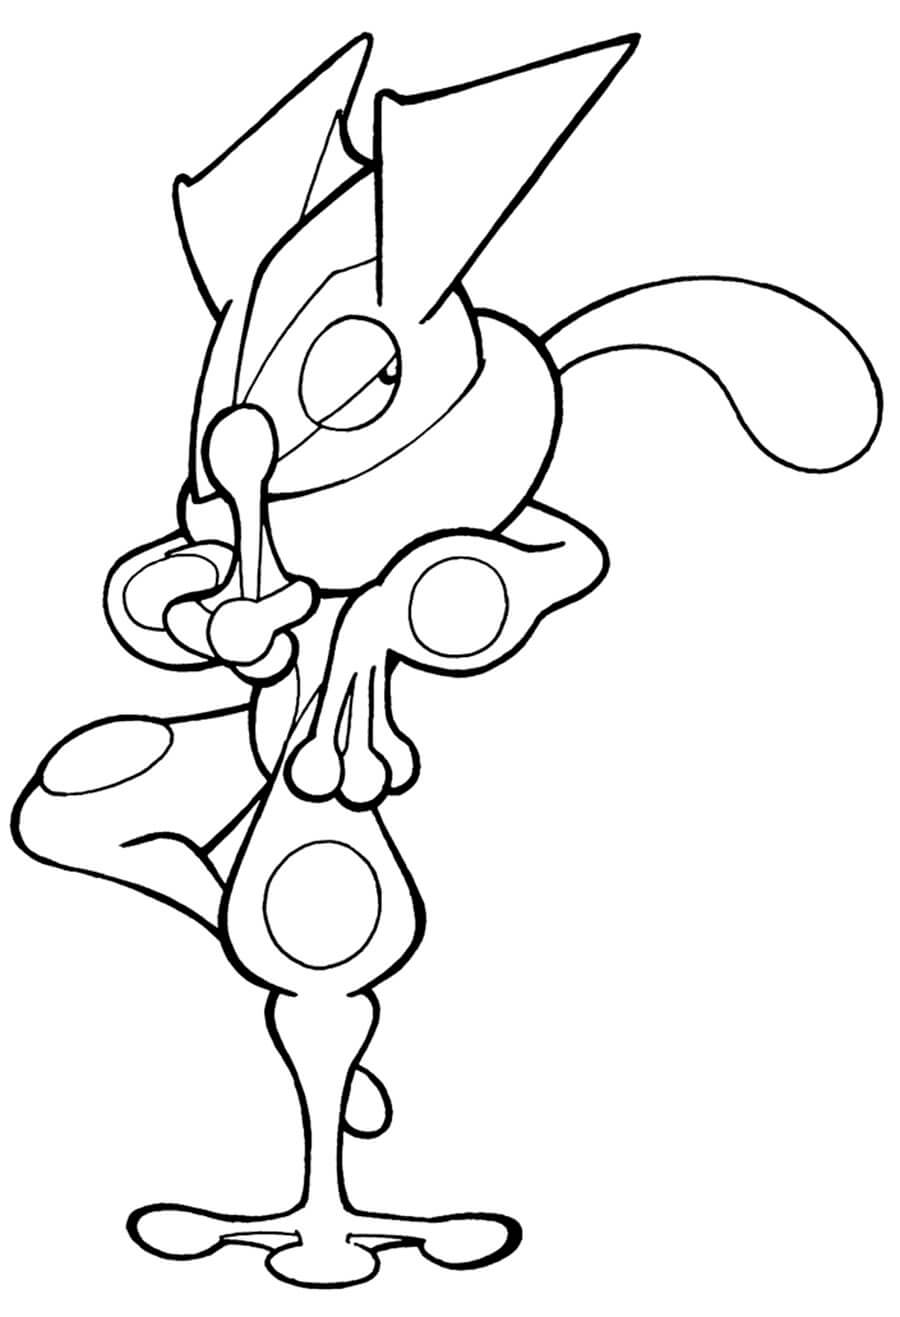 You can download, print or color Greninja Pokemon 9 coloring page online.